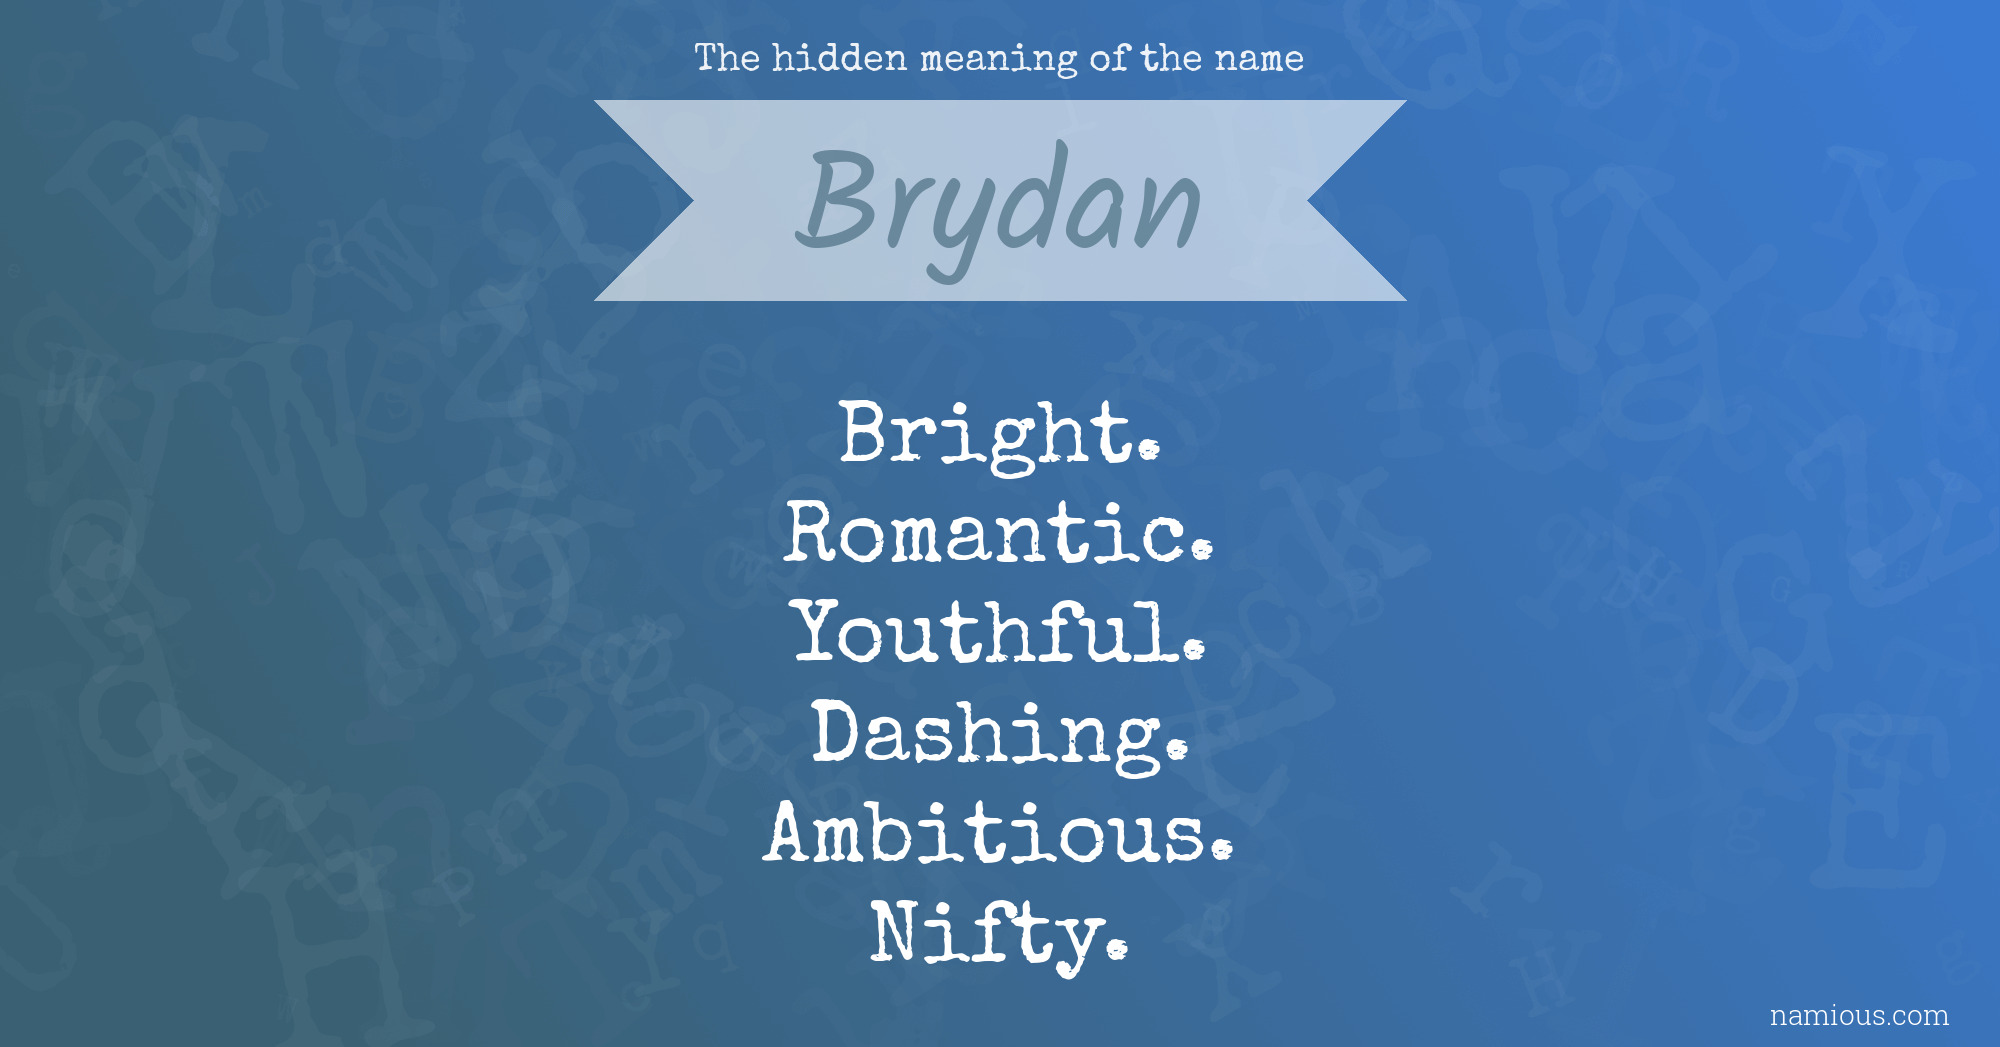 The hidden meaning of the name Brydan